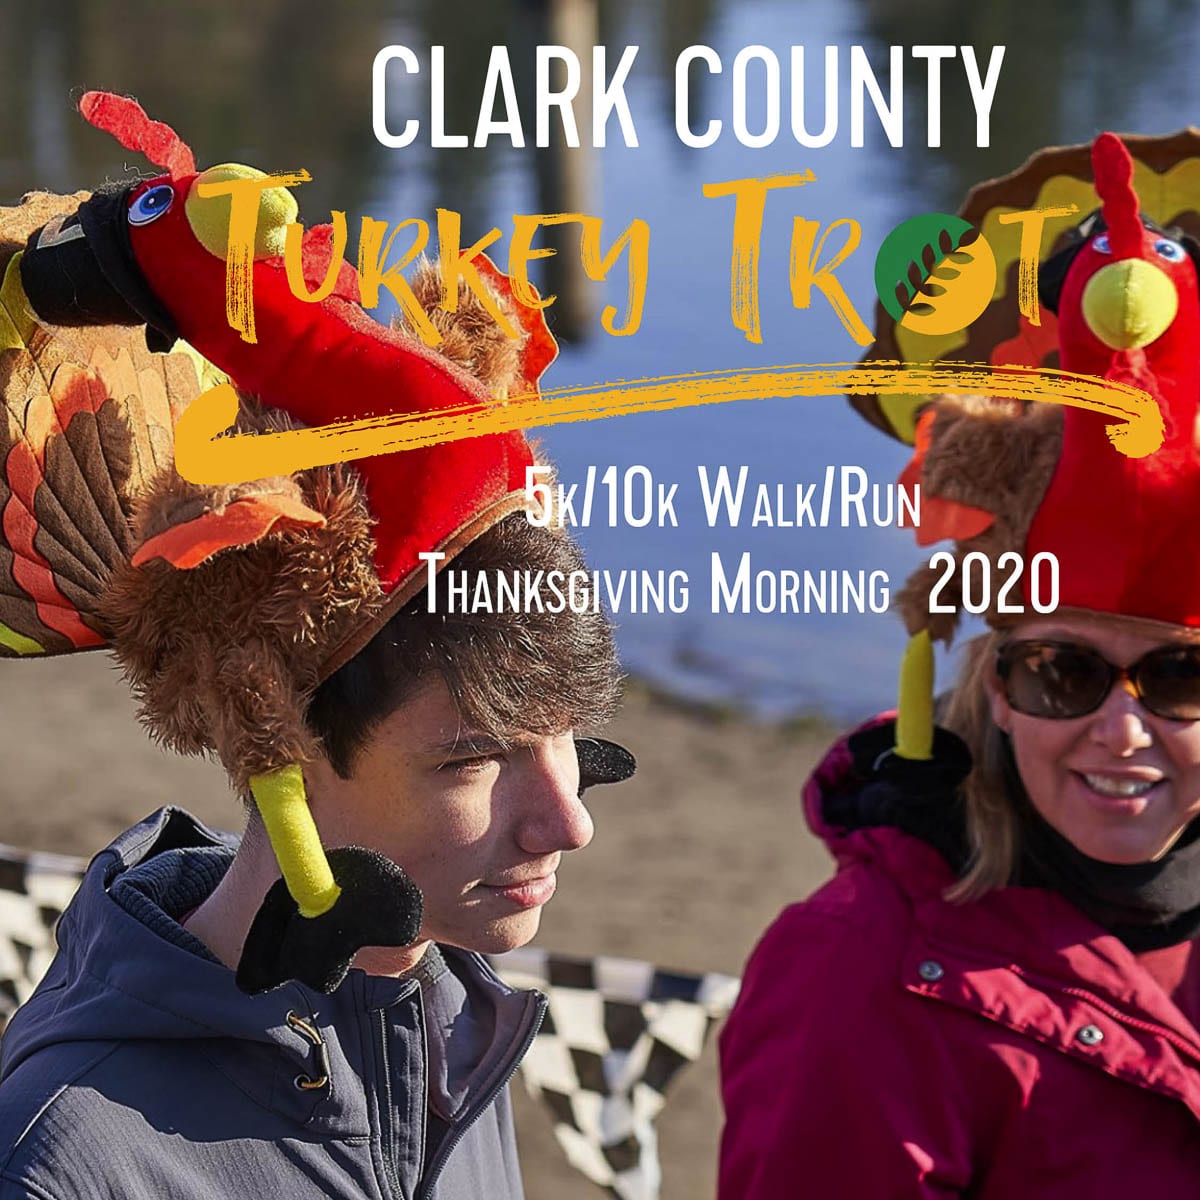 The 2020 Turkey Trot on Thanksgiving morning, will be spread out at five different locations around Clark County, due to the COVID-19 pandemic. This is an attempt to spread people out and provide more “local” sites for people to participate. Photo courtesy of Clark County Food Bank